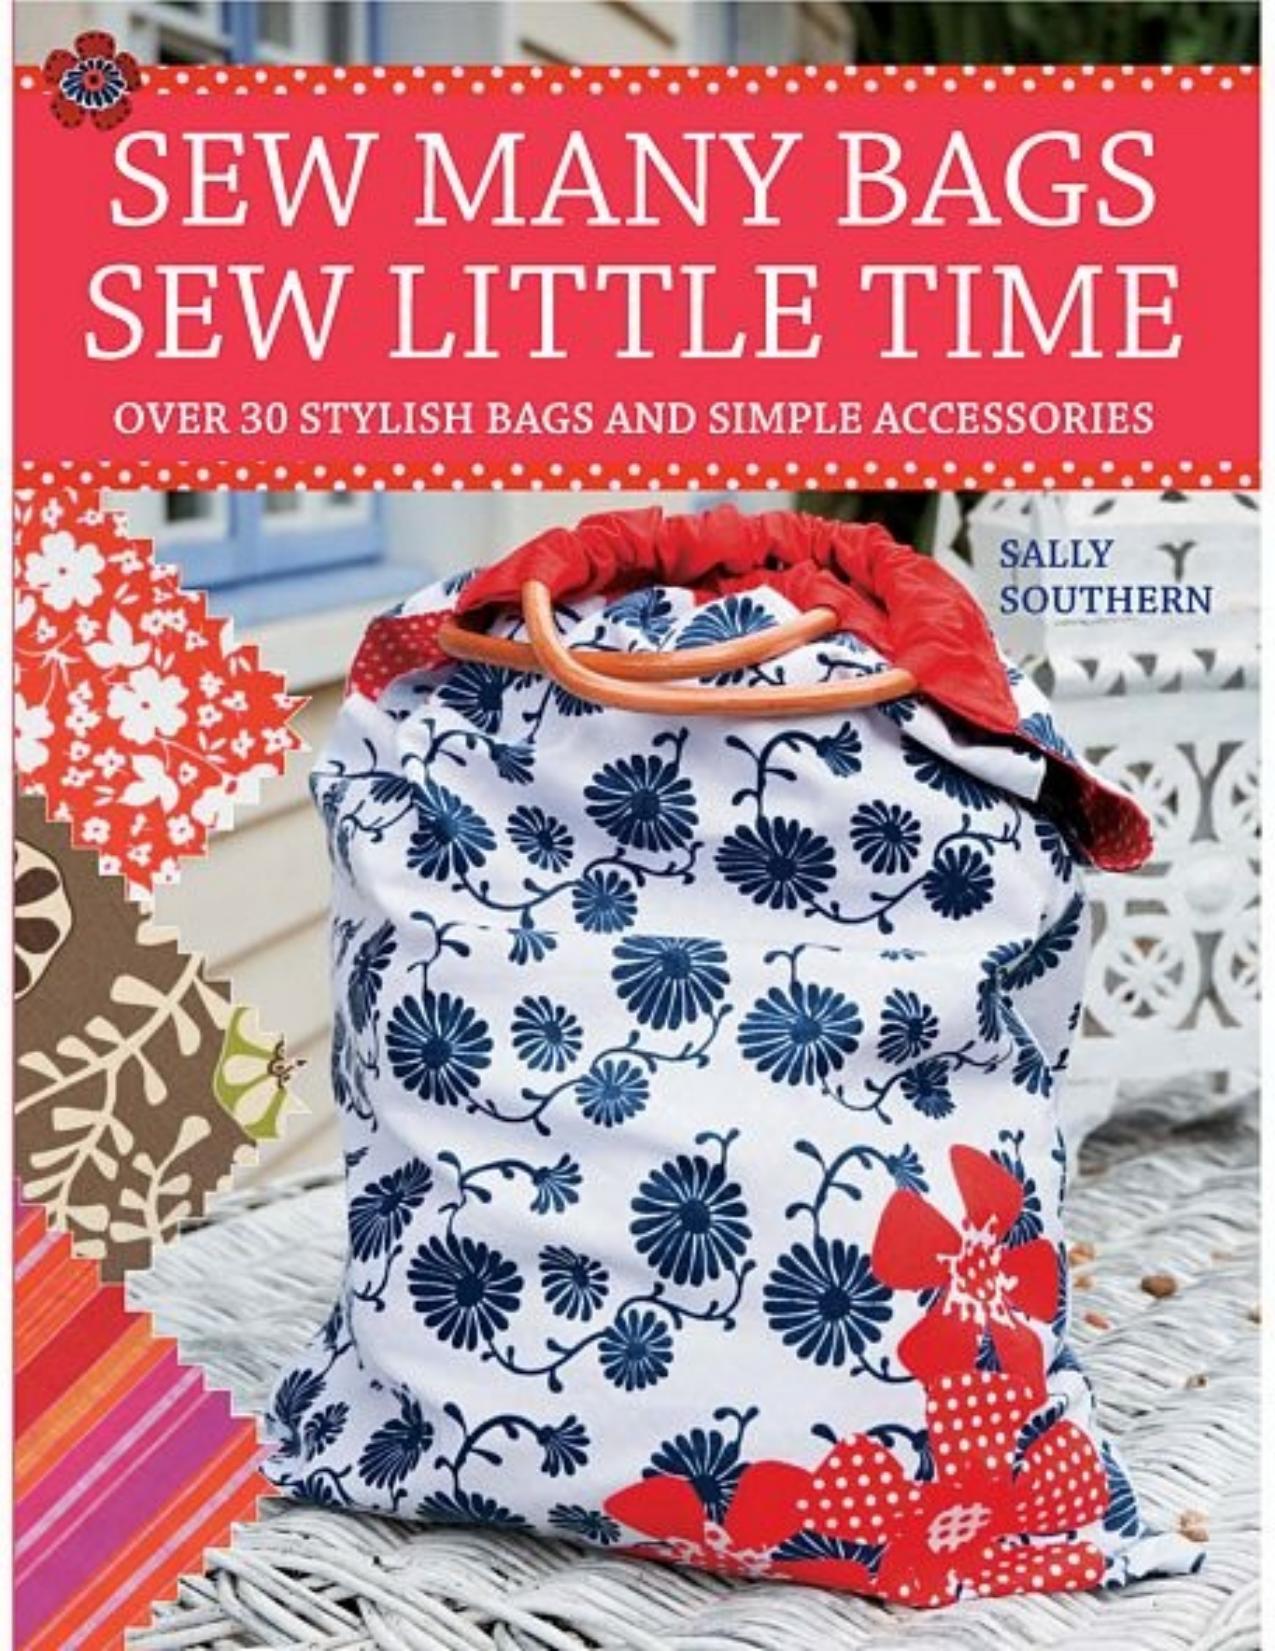 Sew many bags, sew little time: over 30 stylish bags and accessories